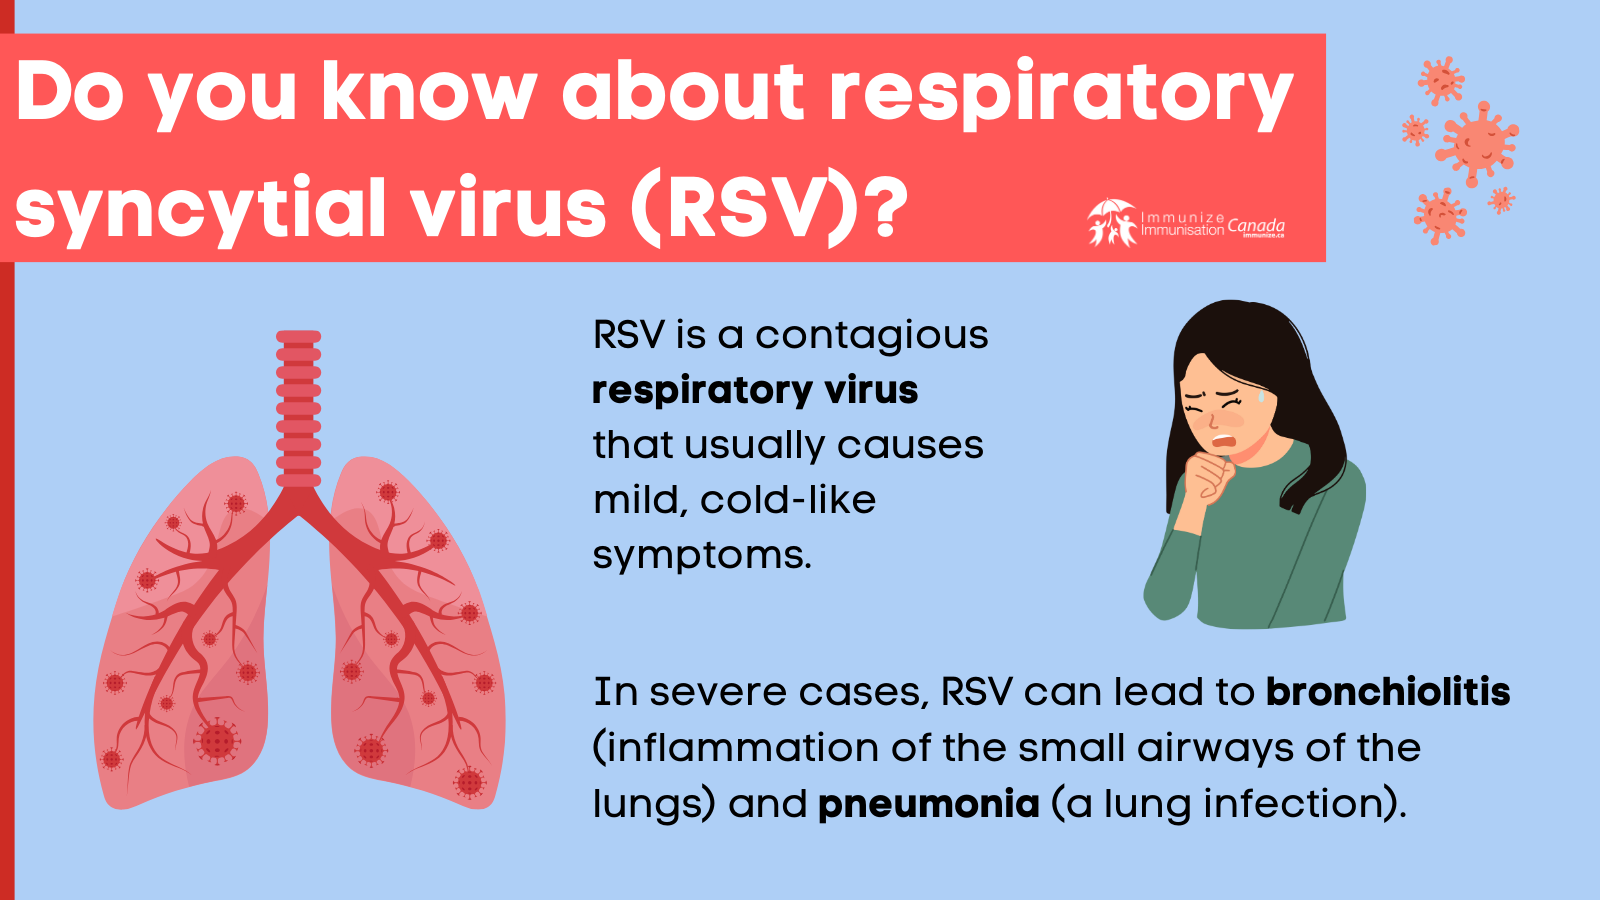 Do you know about respiratory syncytial virus (RSV)? - image 1 for Twitter